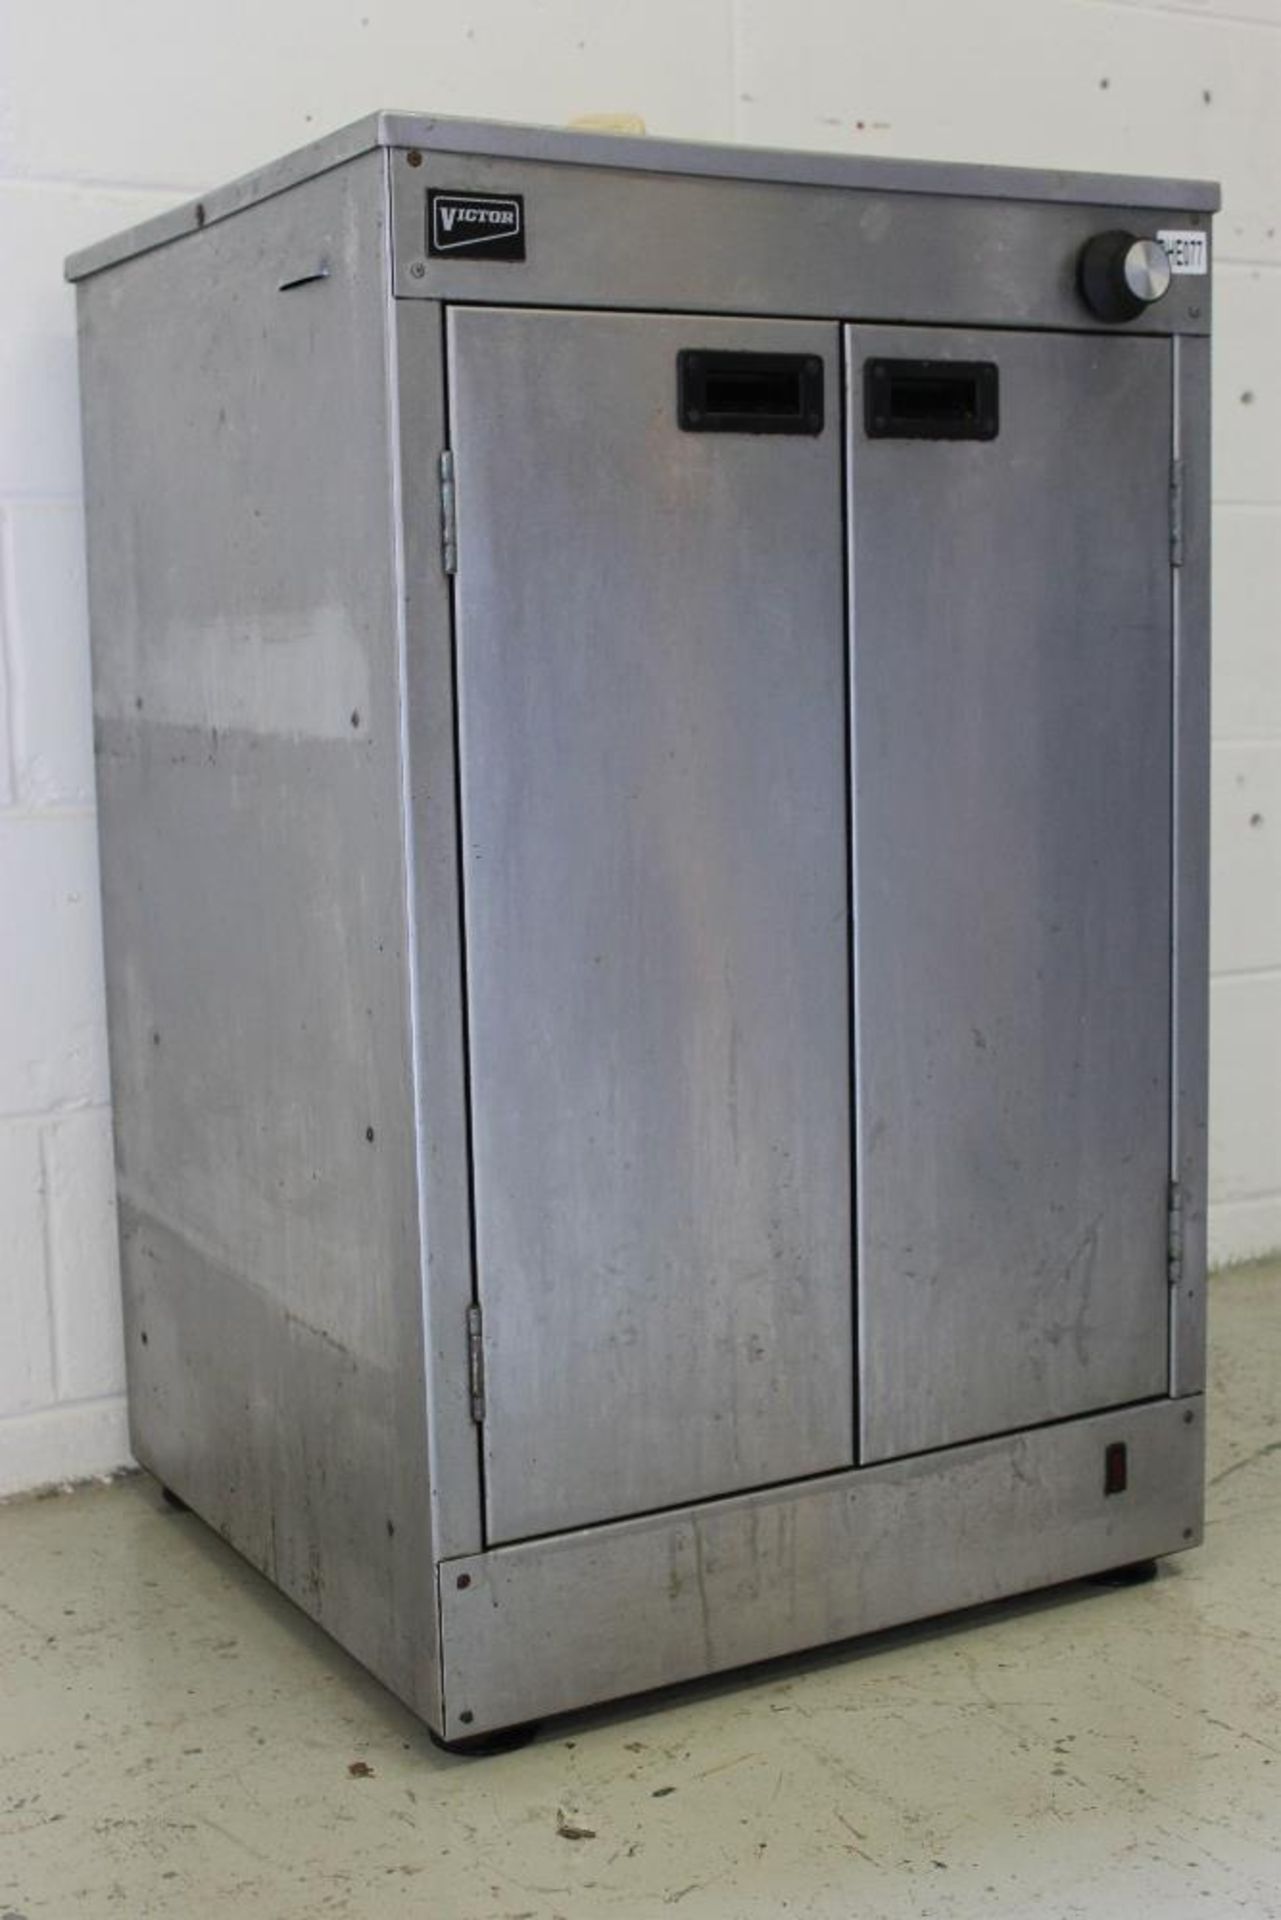 Victor Stainless Steel Plate Warming Cupboard -1ph – Tested Working W58cm x H90cm x D58cm